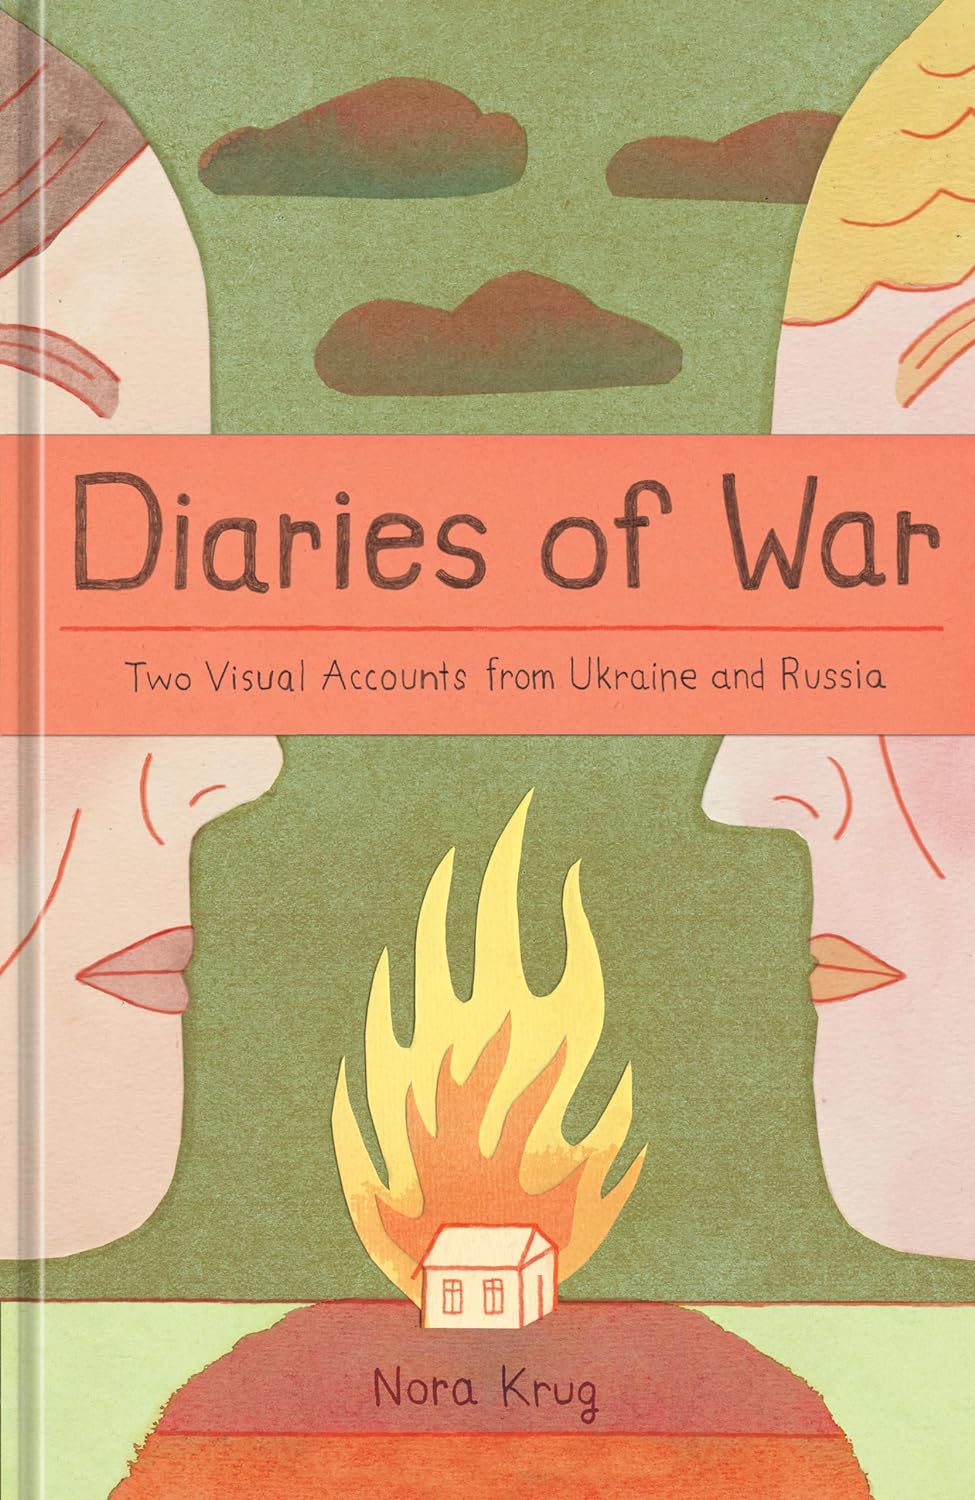 Diaries of War: Two Visual Accounts from Ukraine and Russia [A Graphic Novel History] Hardcover